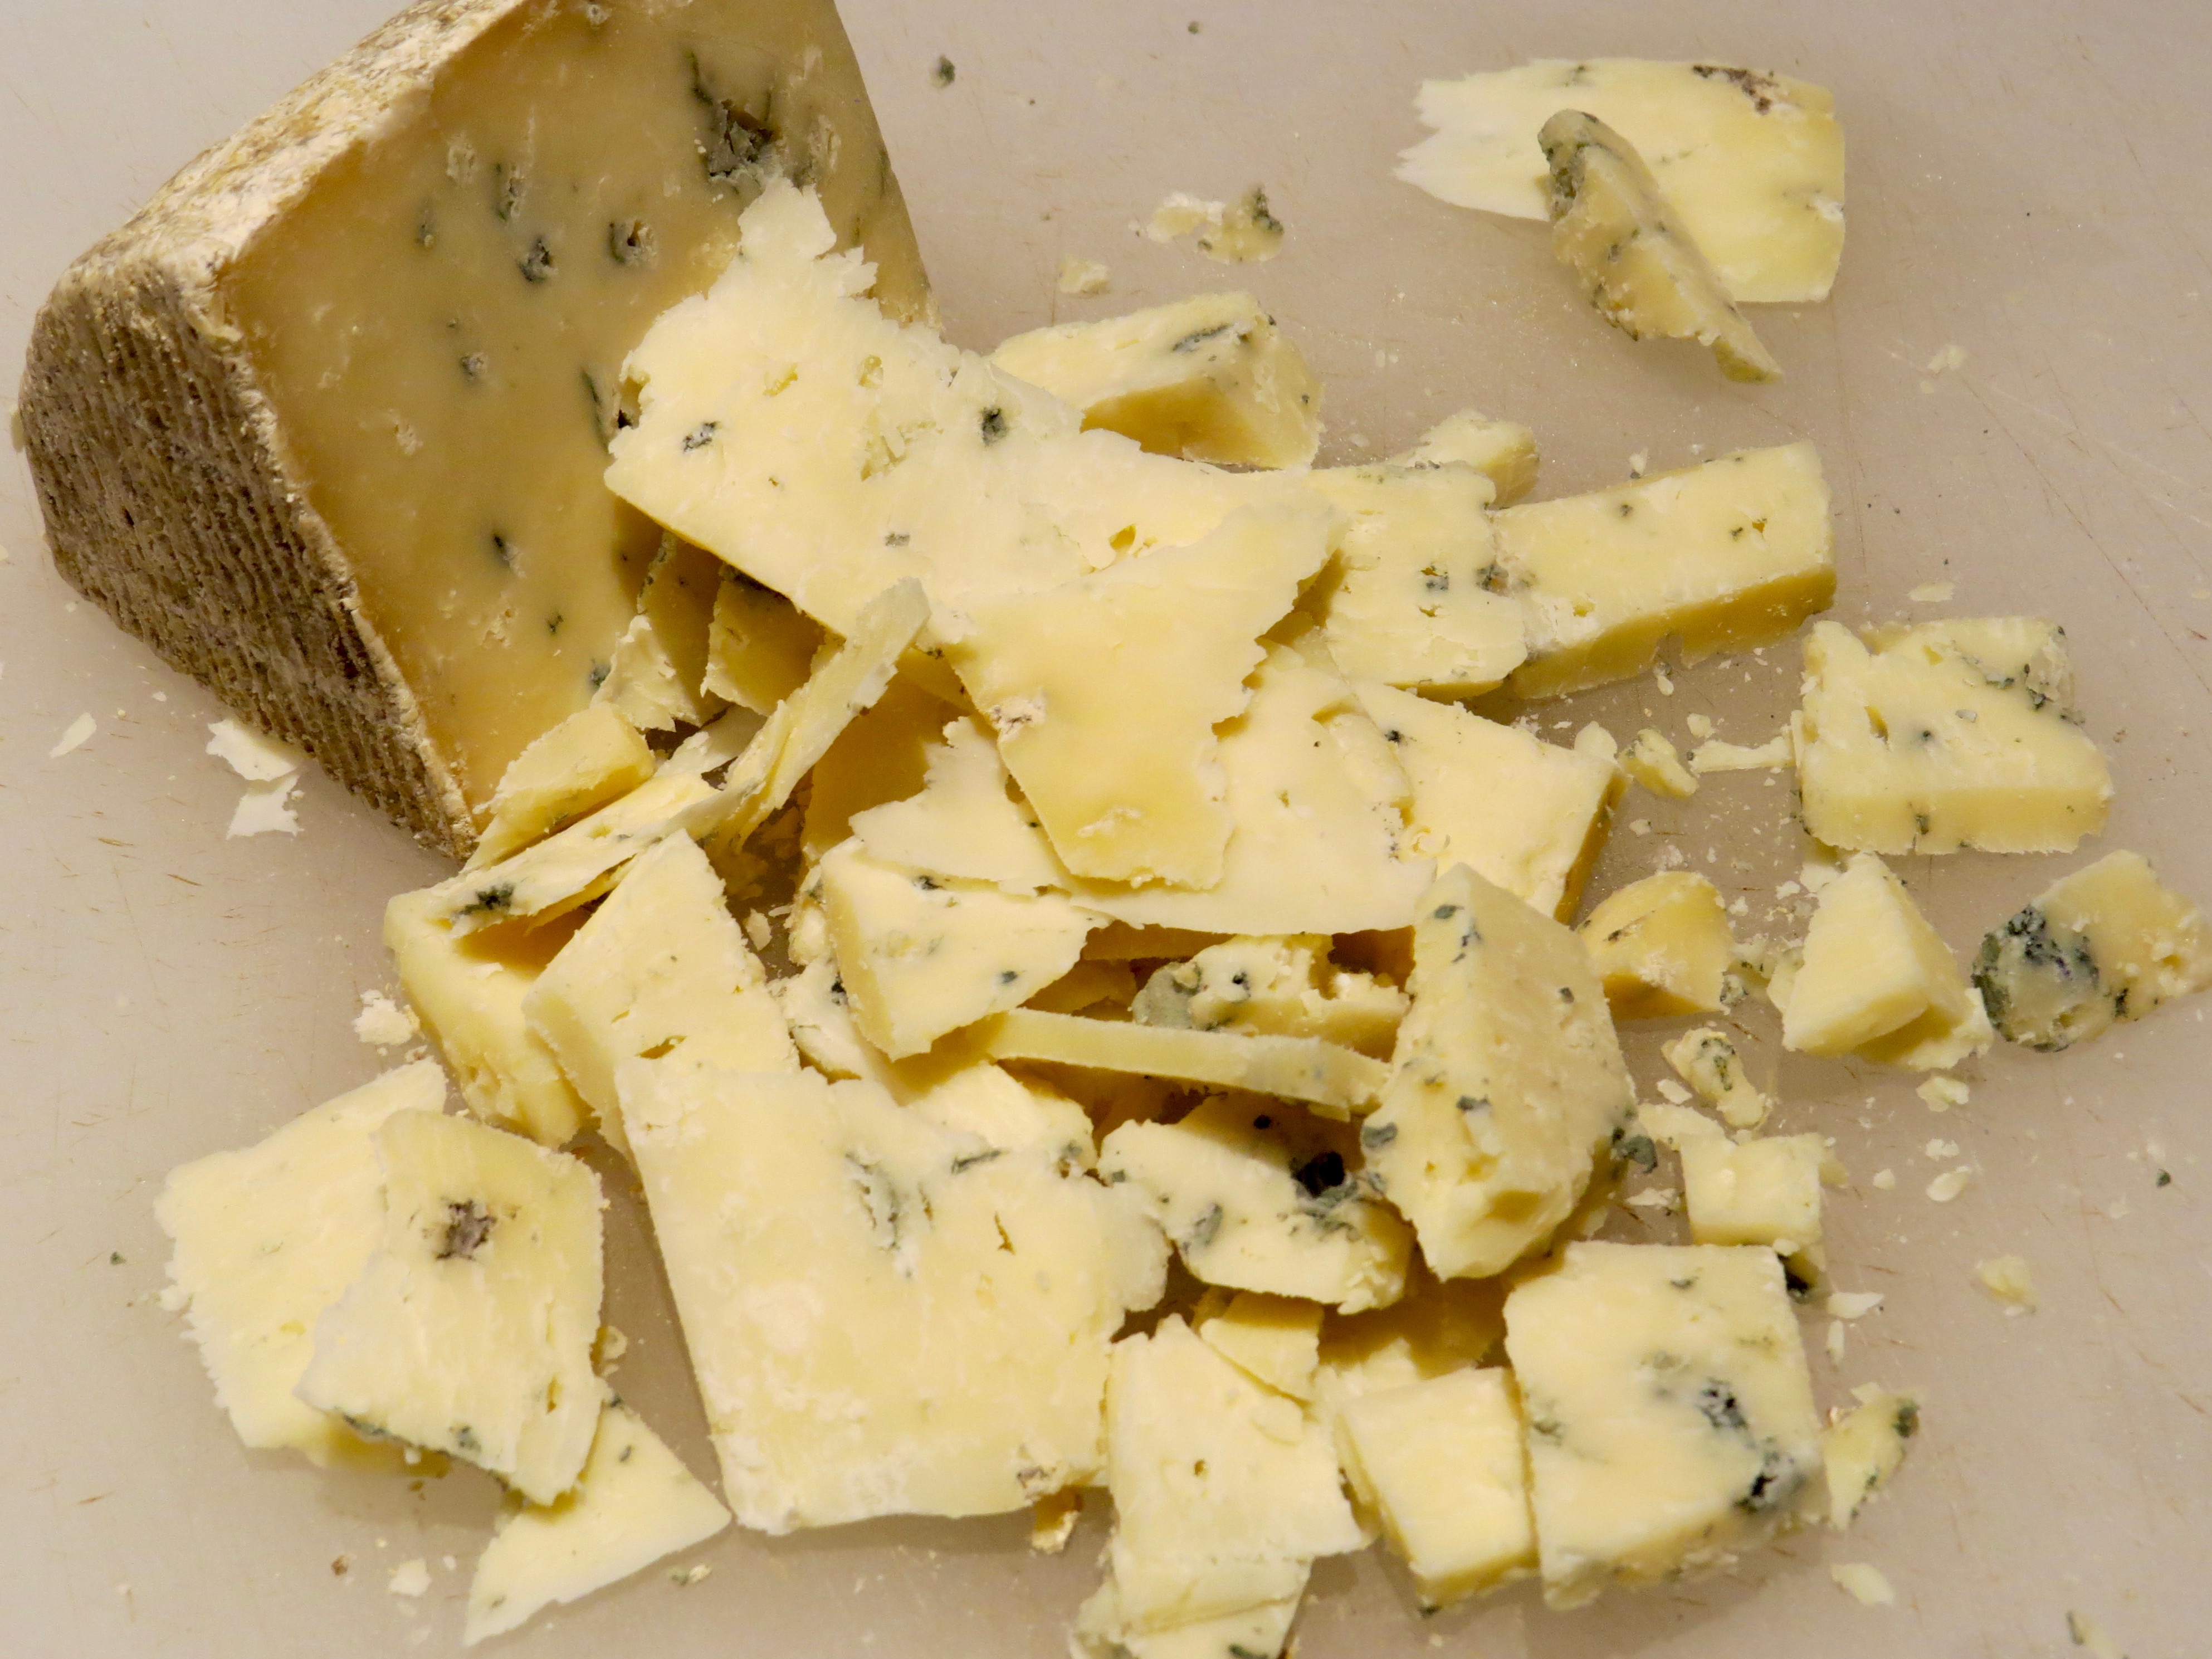 The cheese is bleu.